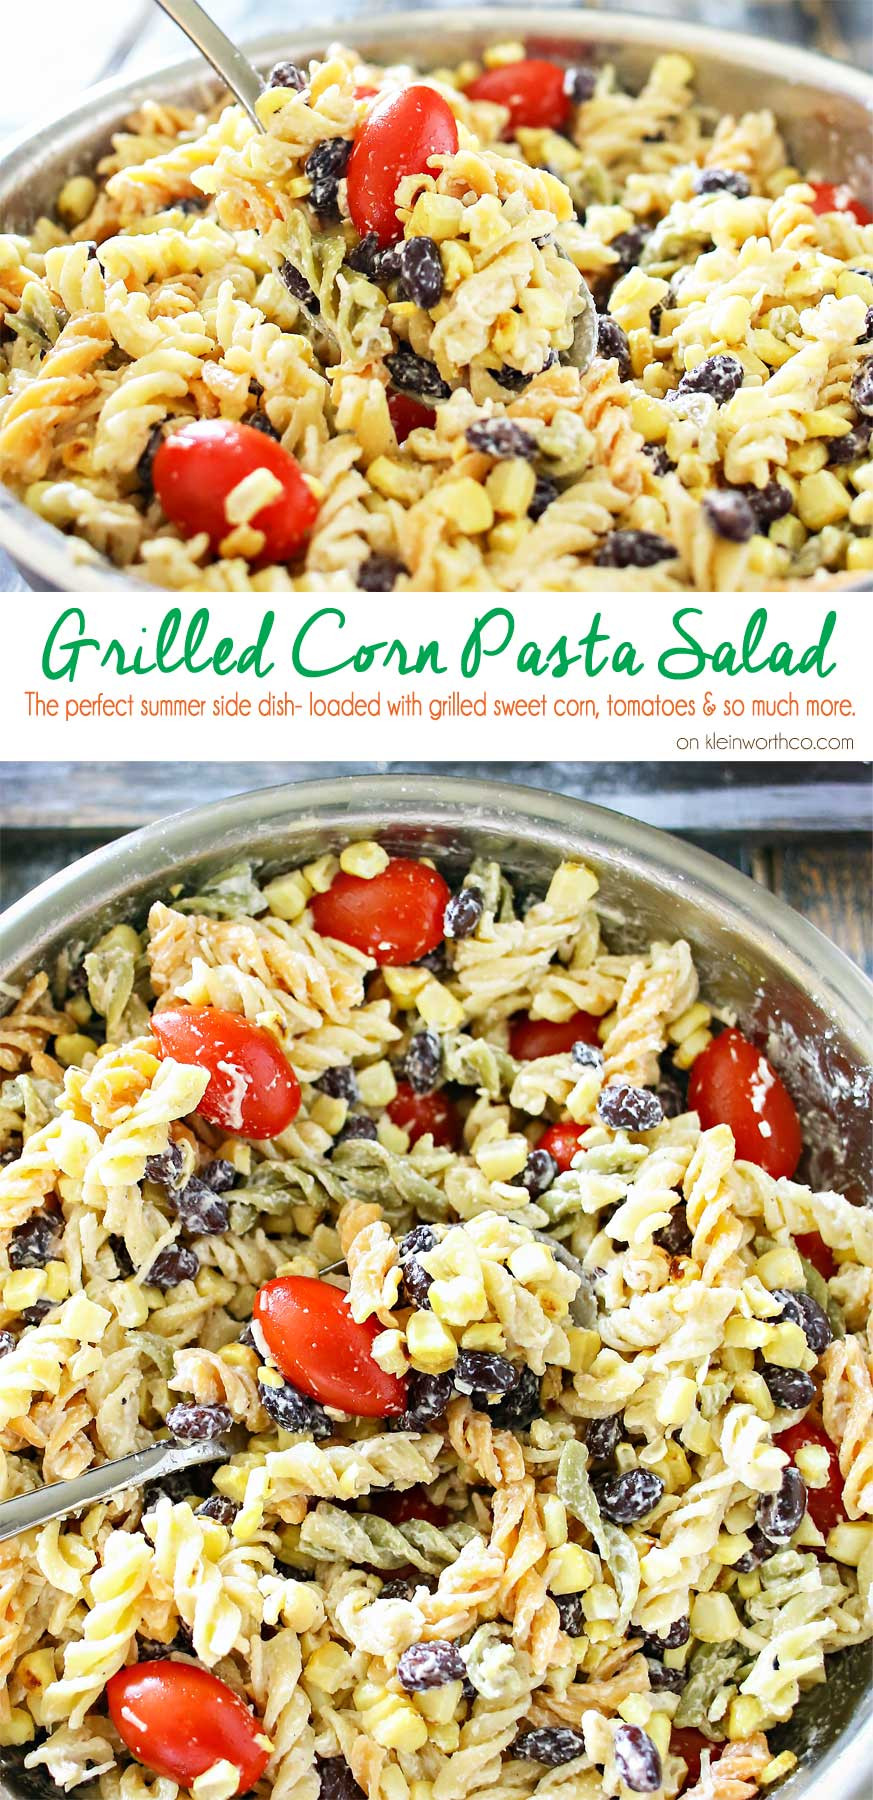 Christmas Side Dishes For A Crowd
 Grilled Corn Pasta Salad Kleinworth & Co